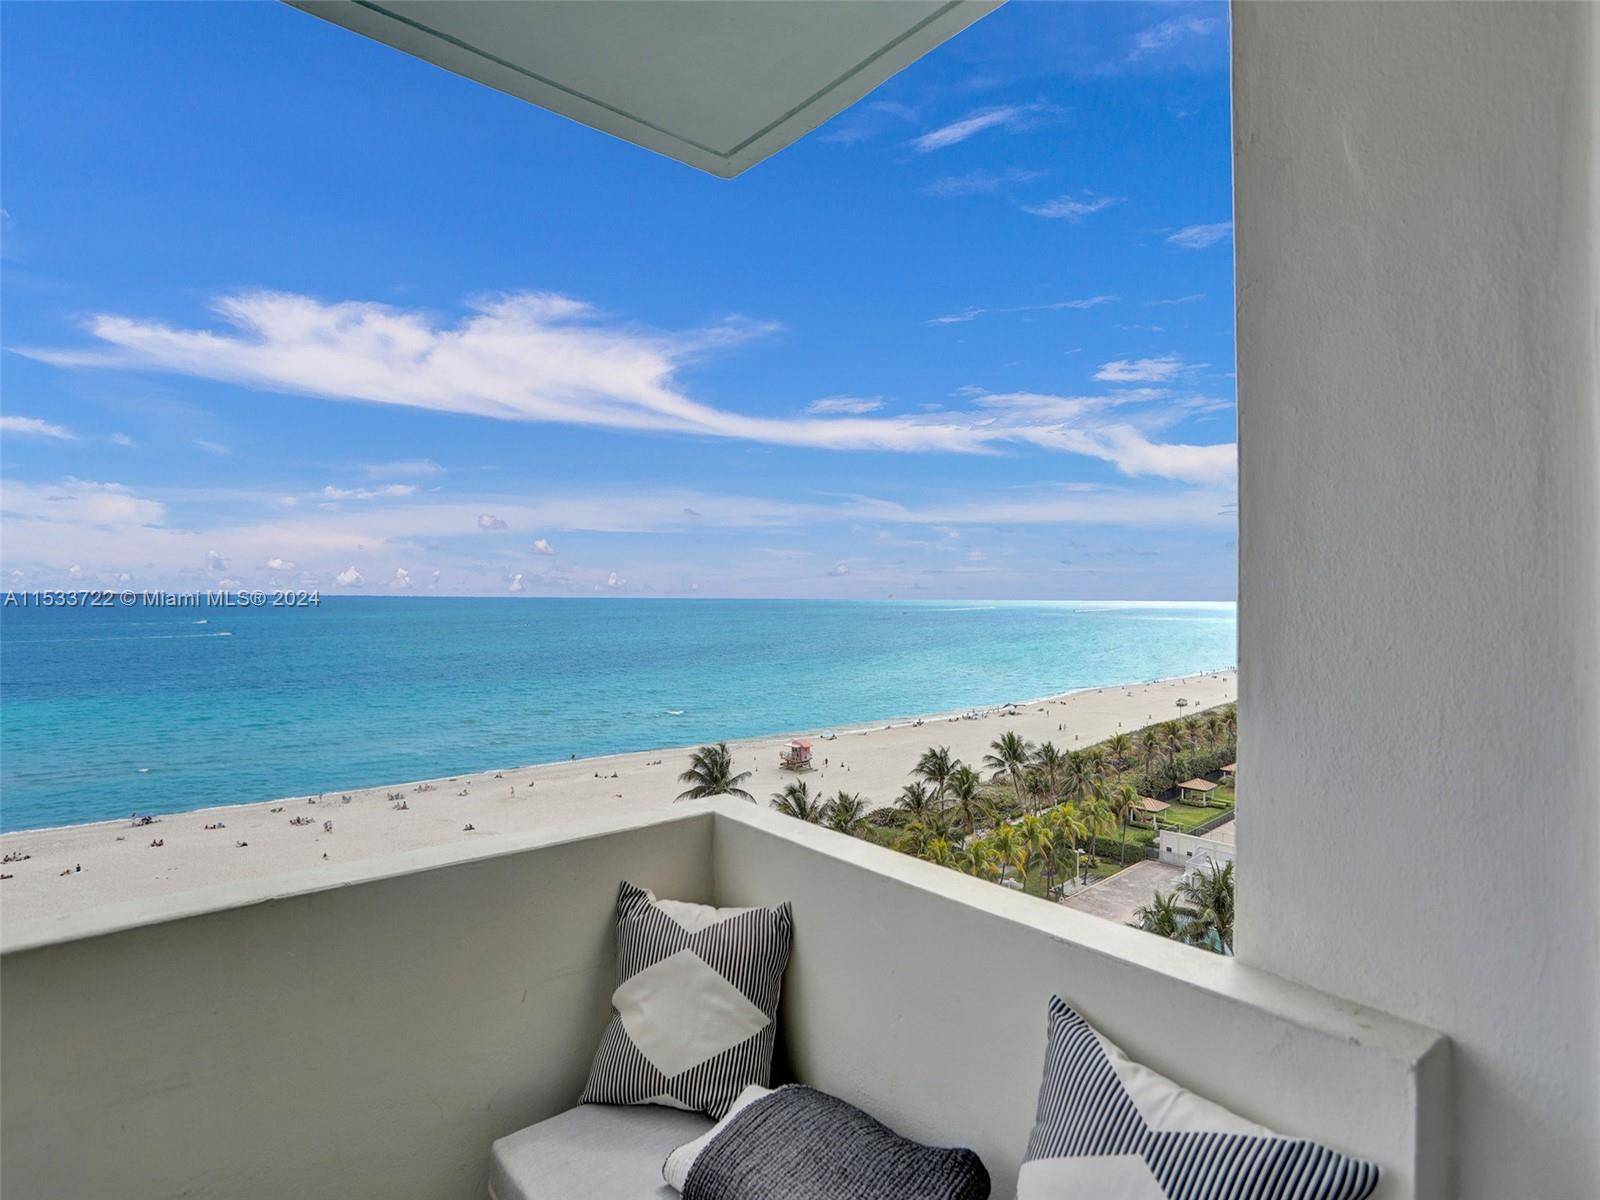 Indulge in oceanfront living with direct ocean views from the second you walk into this meticulously remodeled 1 bedroom, 1.